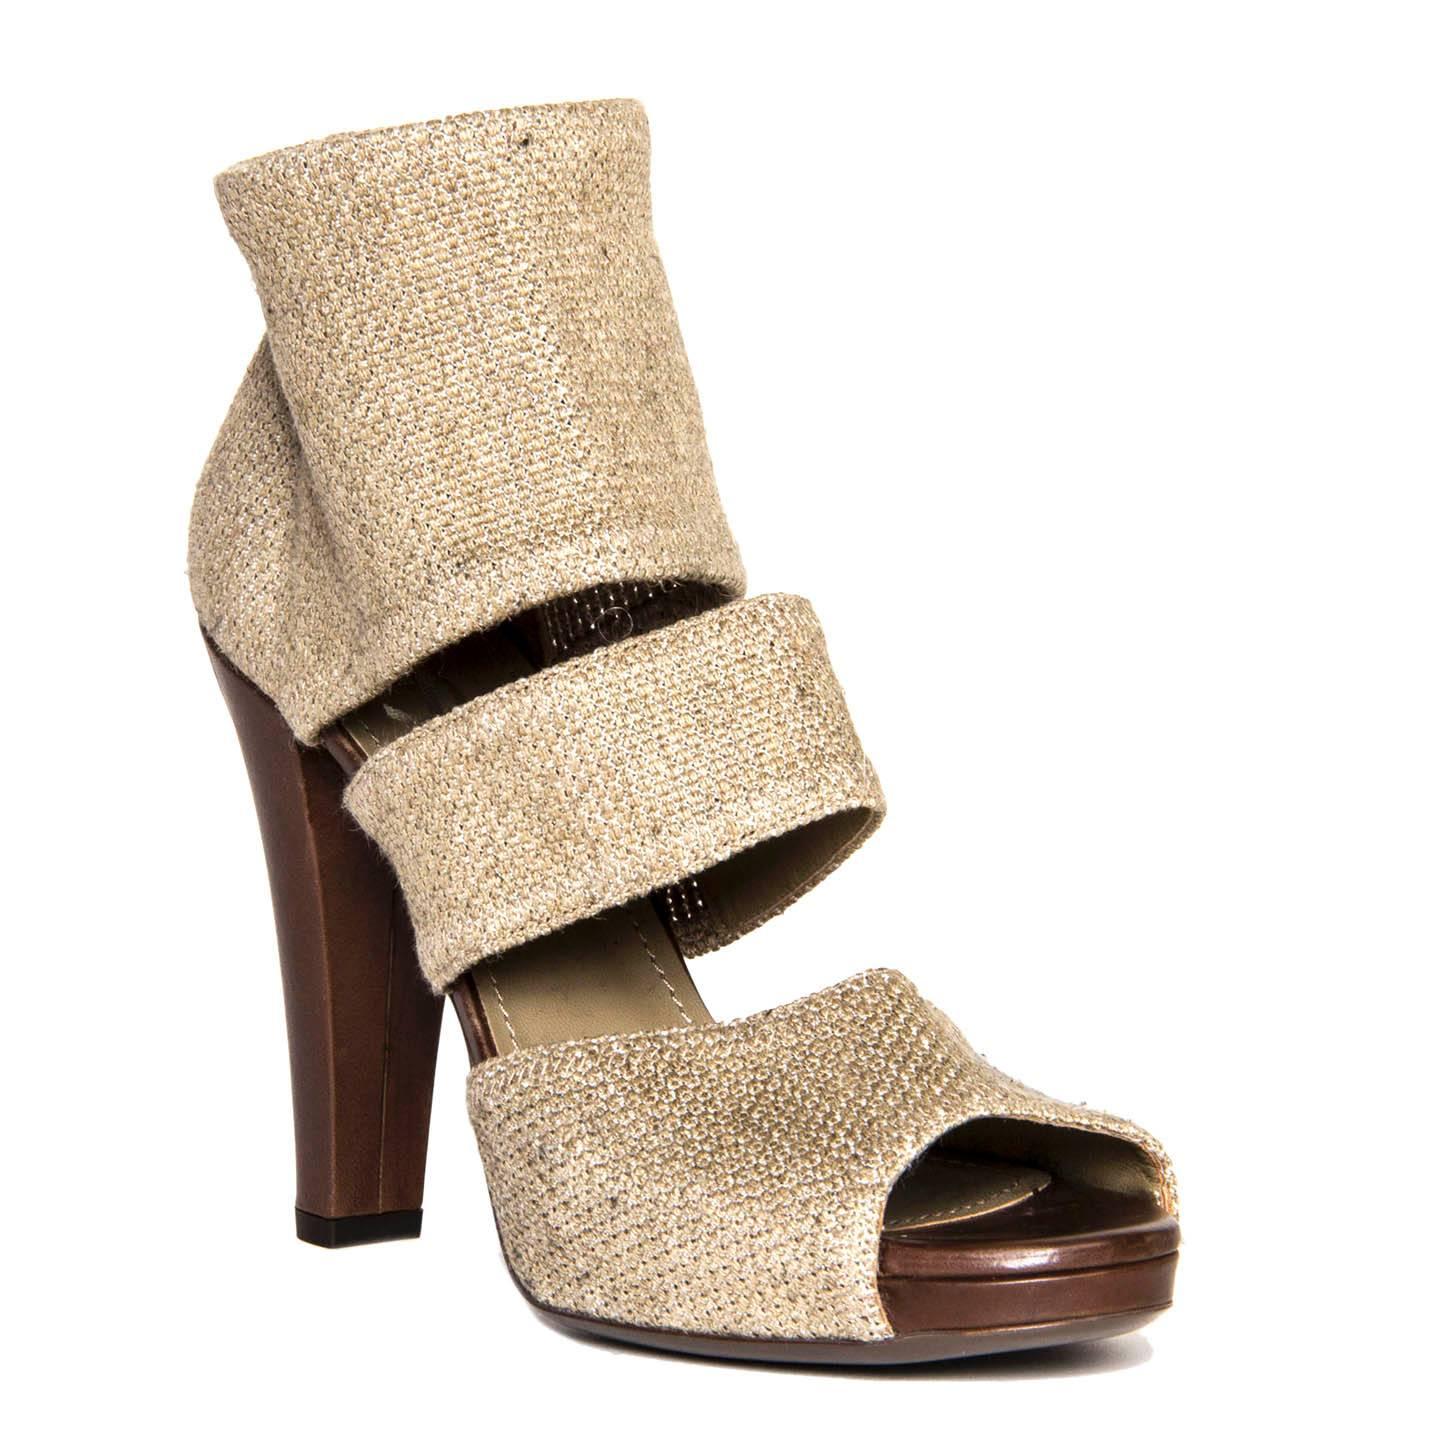 Sand color burlap peep toe sandals with a wide strap at ankle and a smaller one at mid-foot. The top strap is elastic to let the foot slip in the sandal easily. The front of the platform is covered in dark brown leather as well as the heel, which is